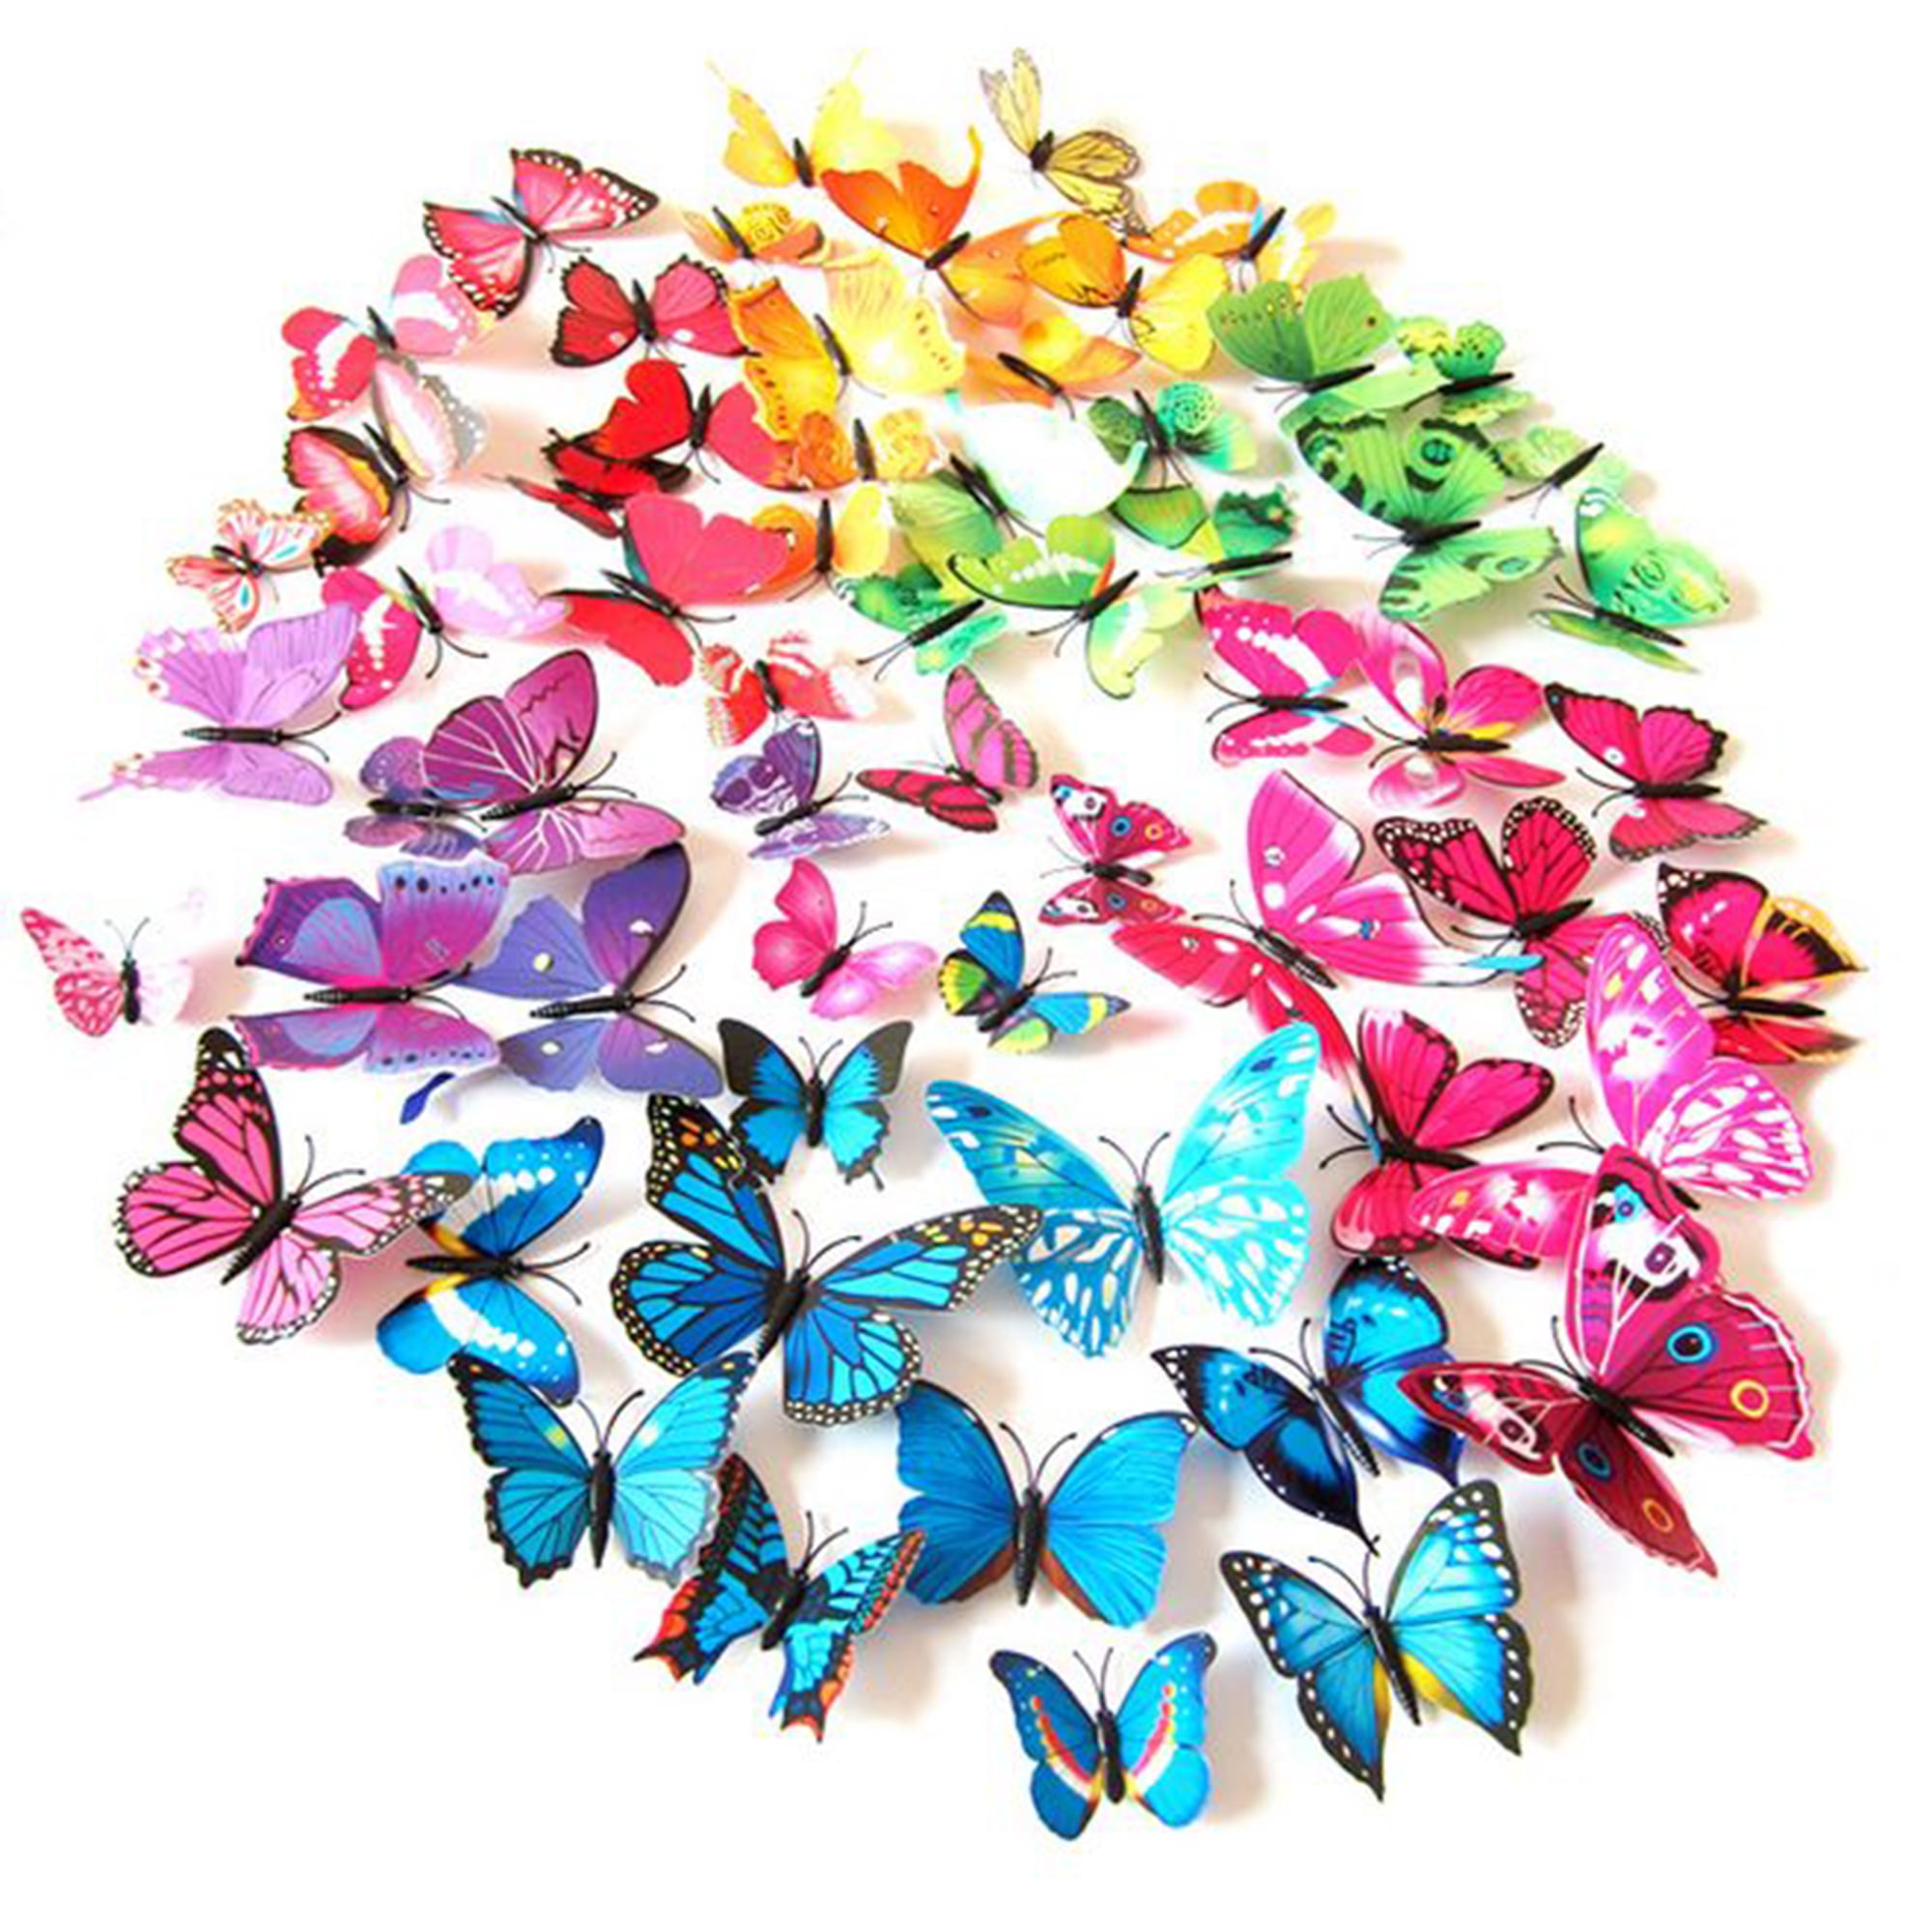 3D Butterfly Wall Stickers BENBO 36 Pieces 3 Sizes Butterfly Mural Decals Stickers Removable Hollowed-Out Metallic Butterfly Wall Decors for Bedroom Bathroom Home Party Decorations 3 Colors 